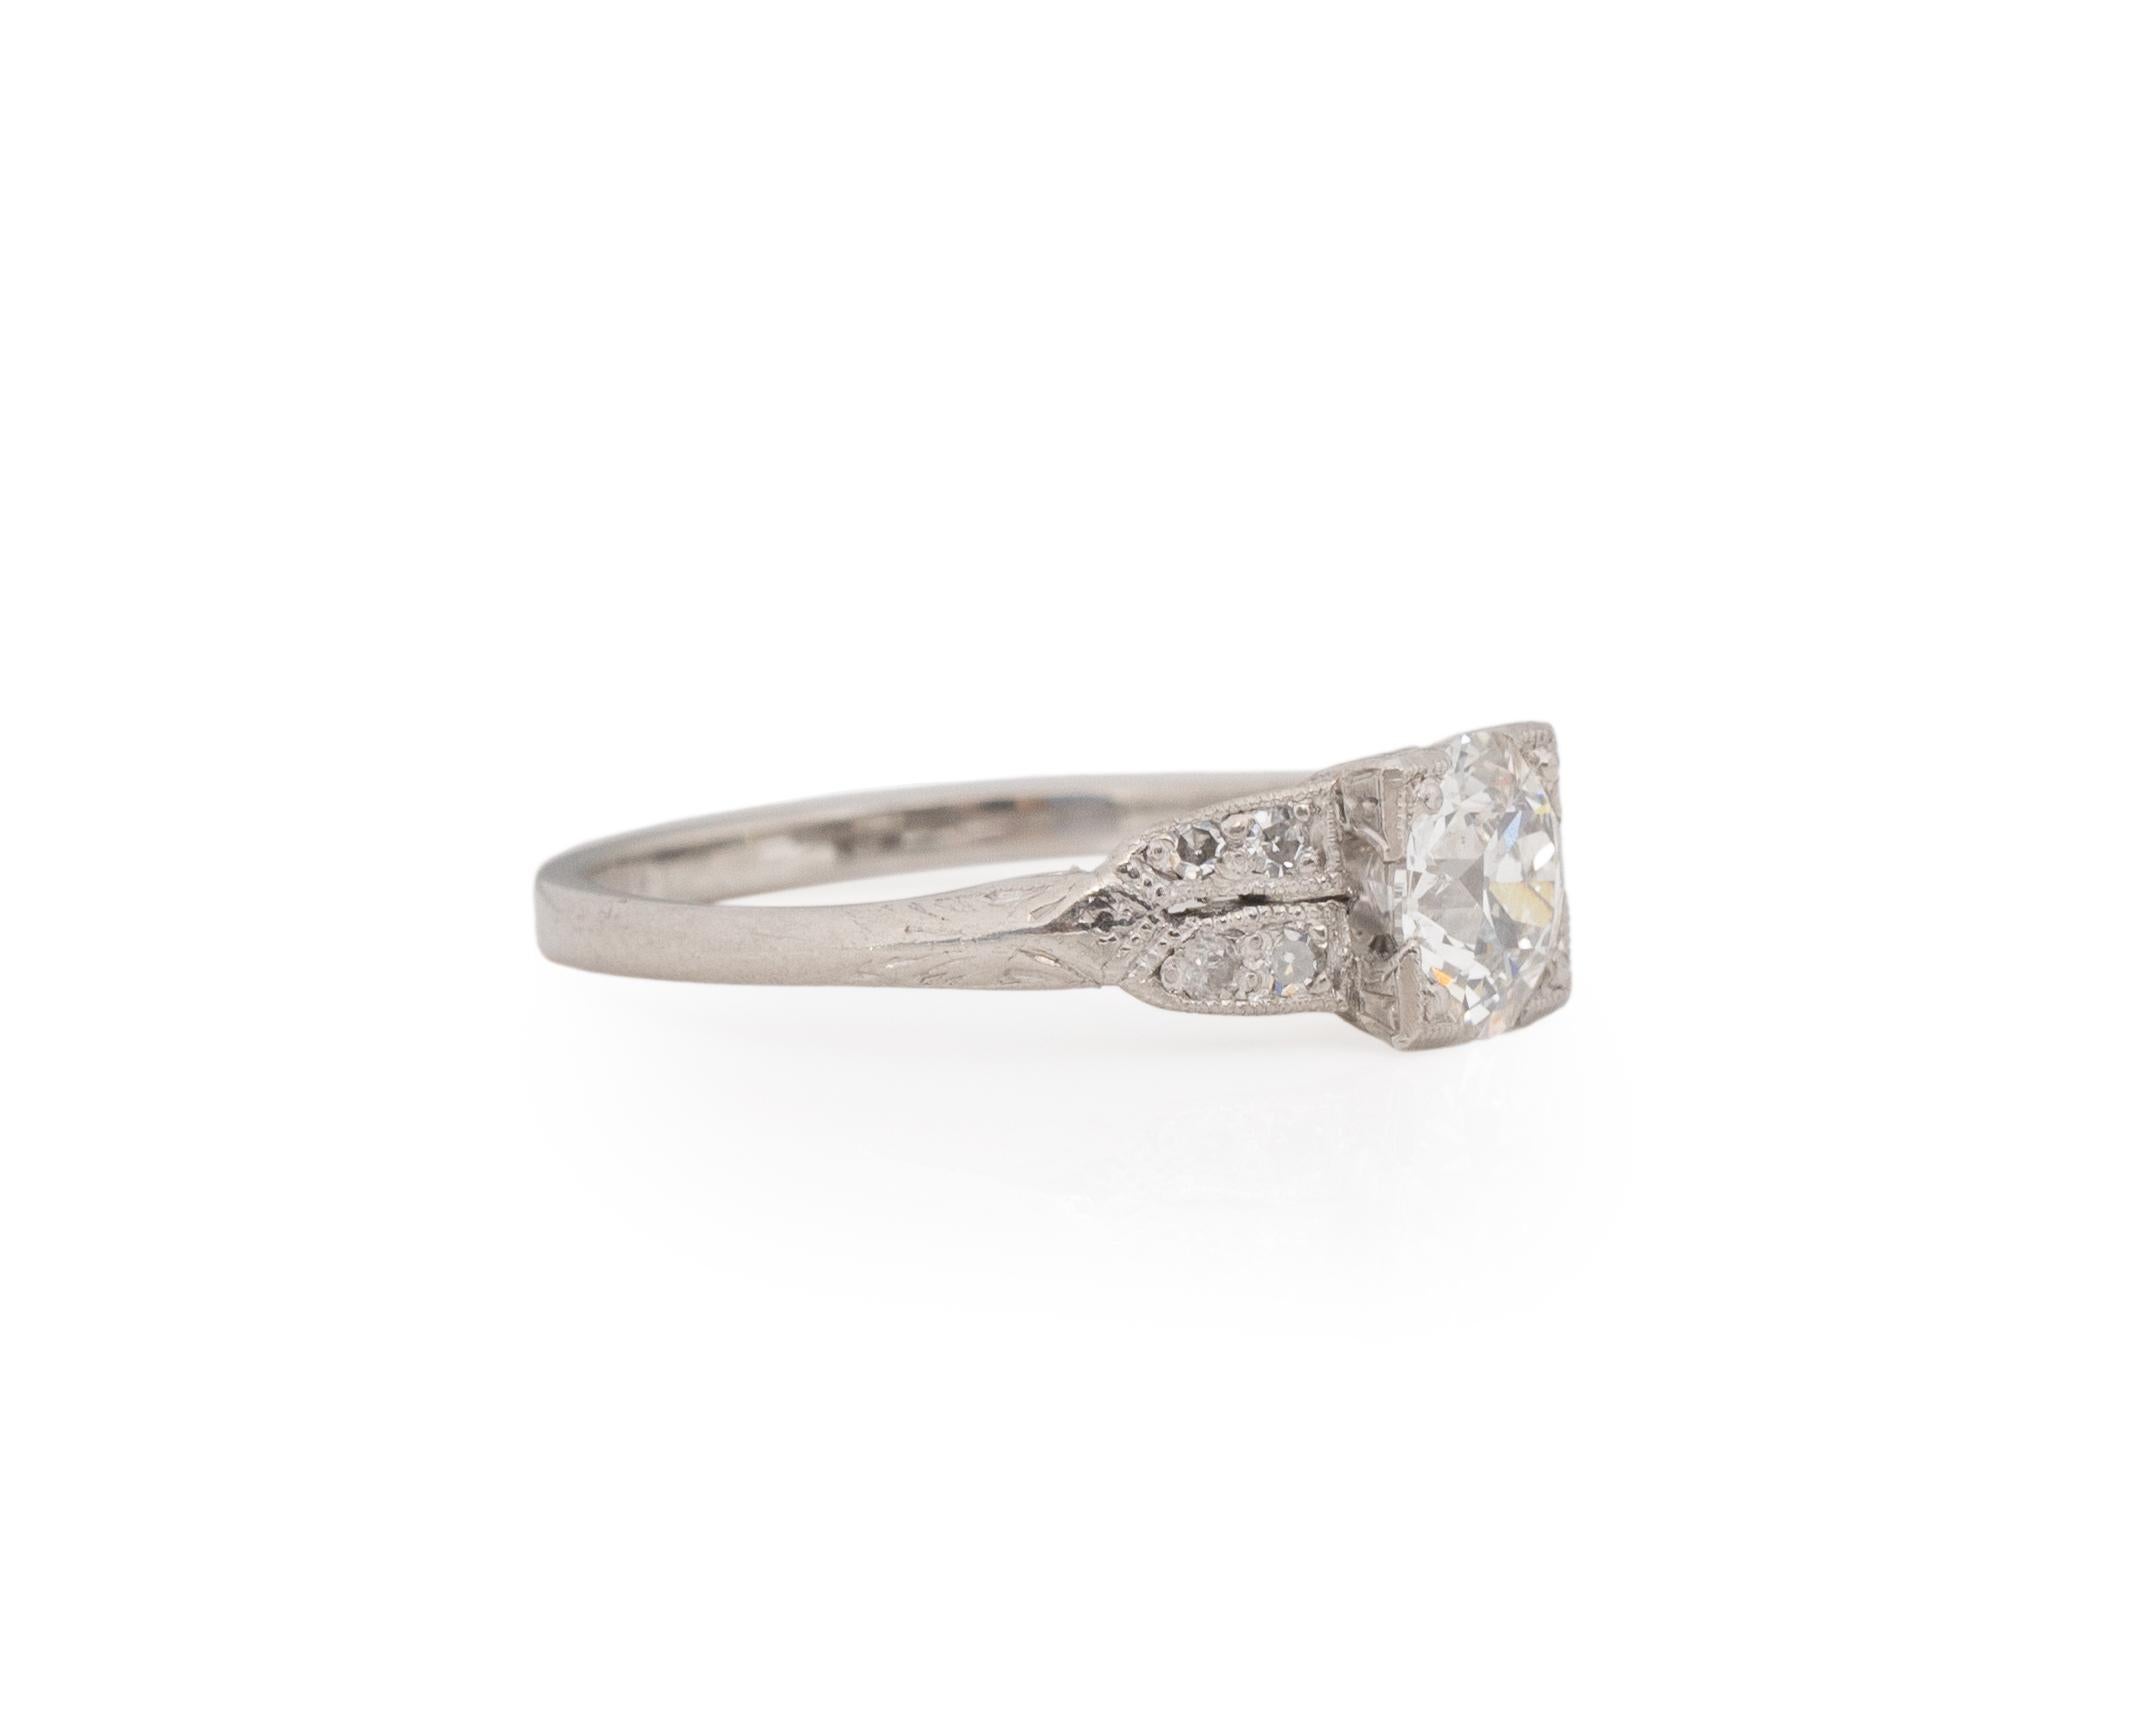 Ring Size: 6
Metal Type: Platinum  [Hallmarked, and Tested]
Weight:  3.2 grams

Center Diamond Details:
GIA LAB REPORT #:5221711482
Weight: .73ct
Cut: Old European brilliant
Color: K
Clarity: VS1
Measurements: 5.92mm x 6.08mm x 3.16mm 

Finger to